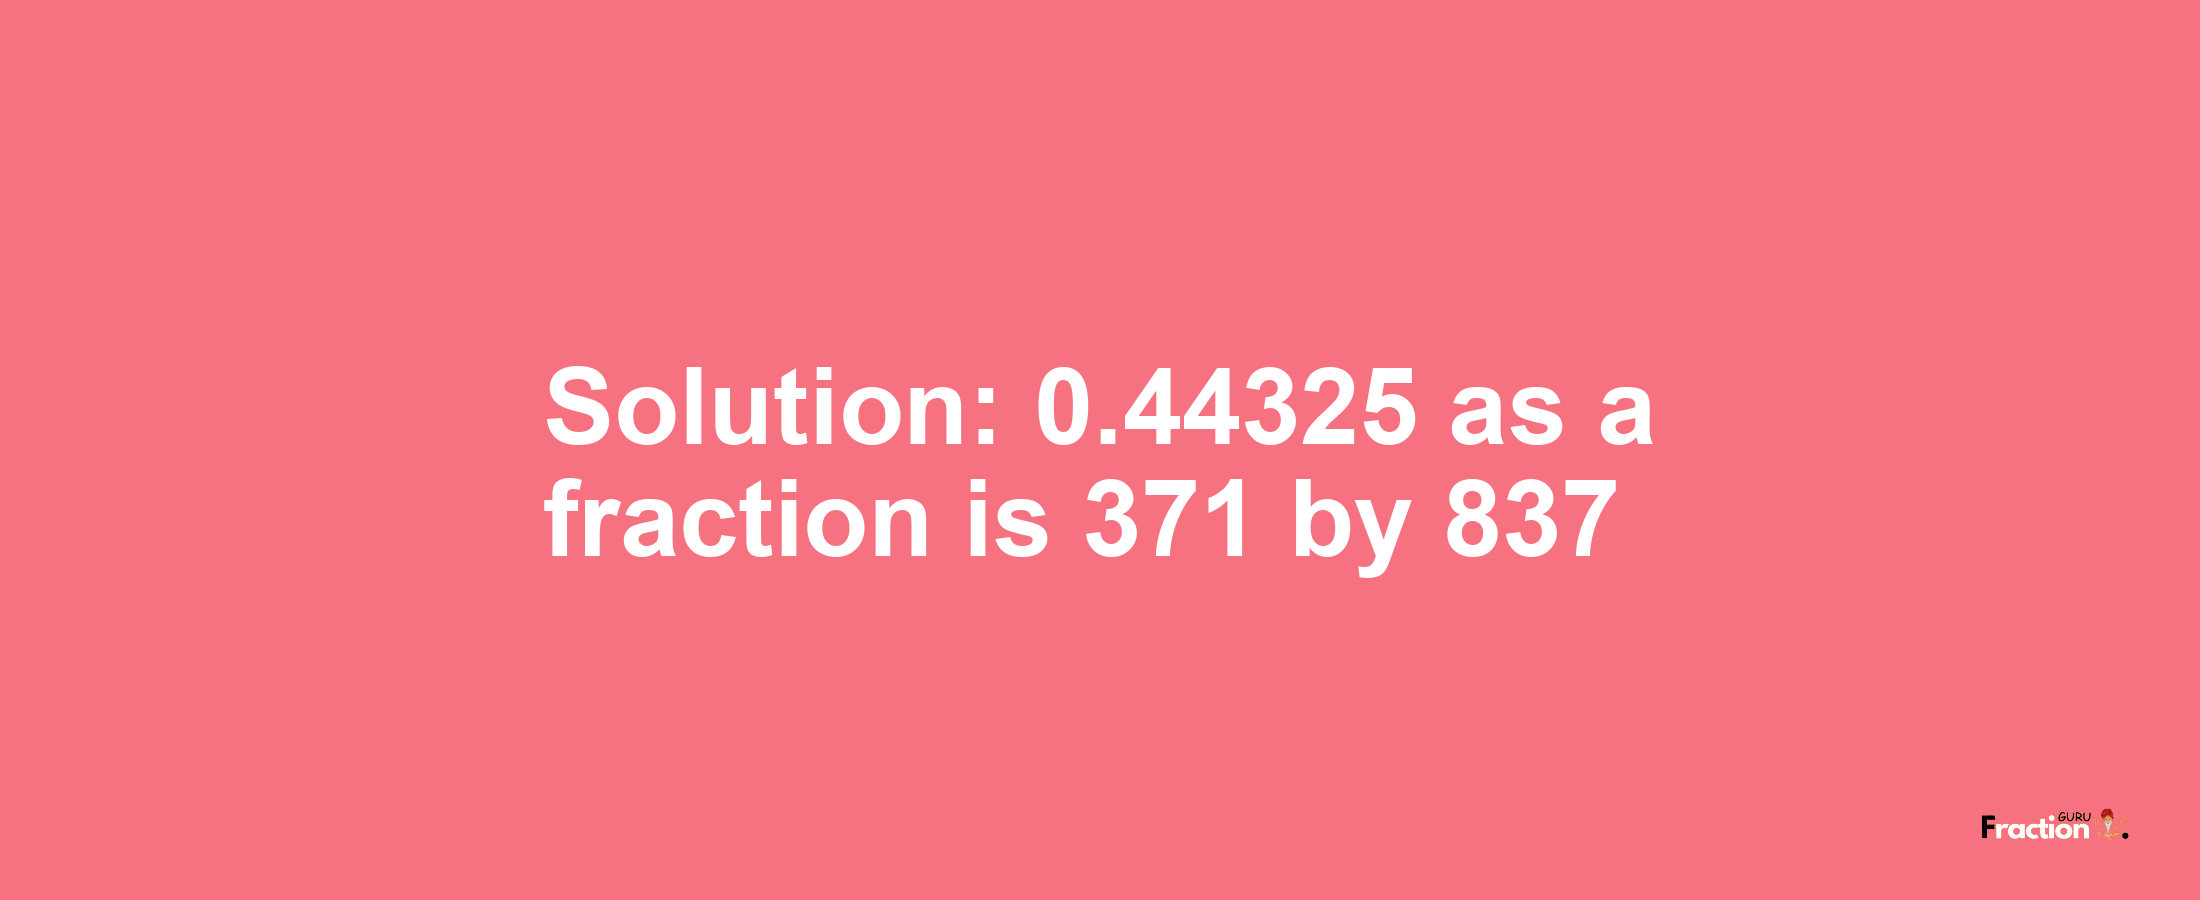 Solution:0.44325 as a fraction is 371/837